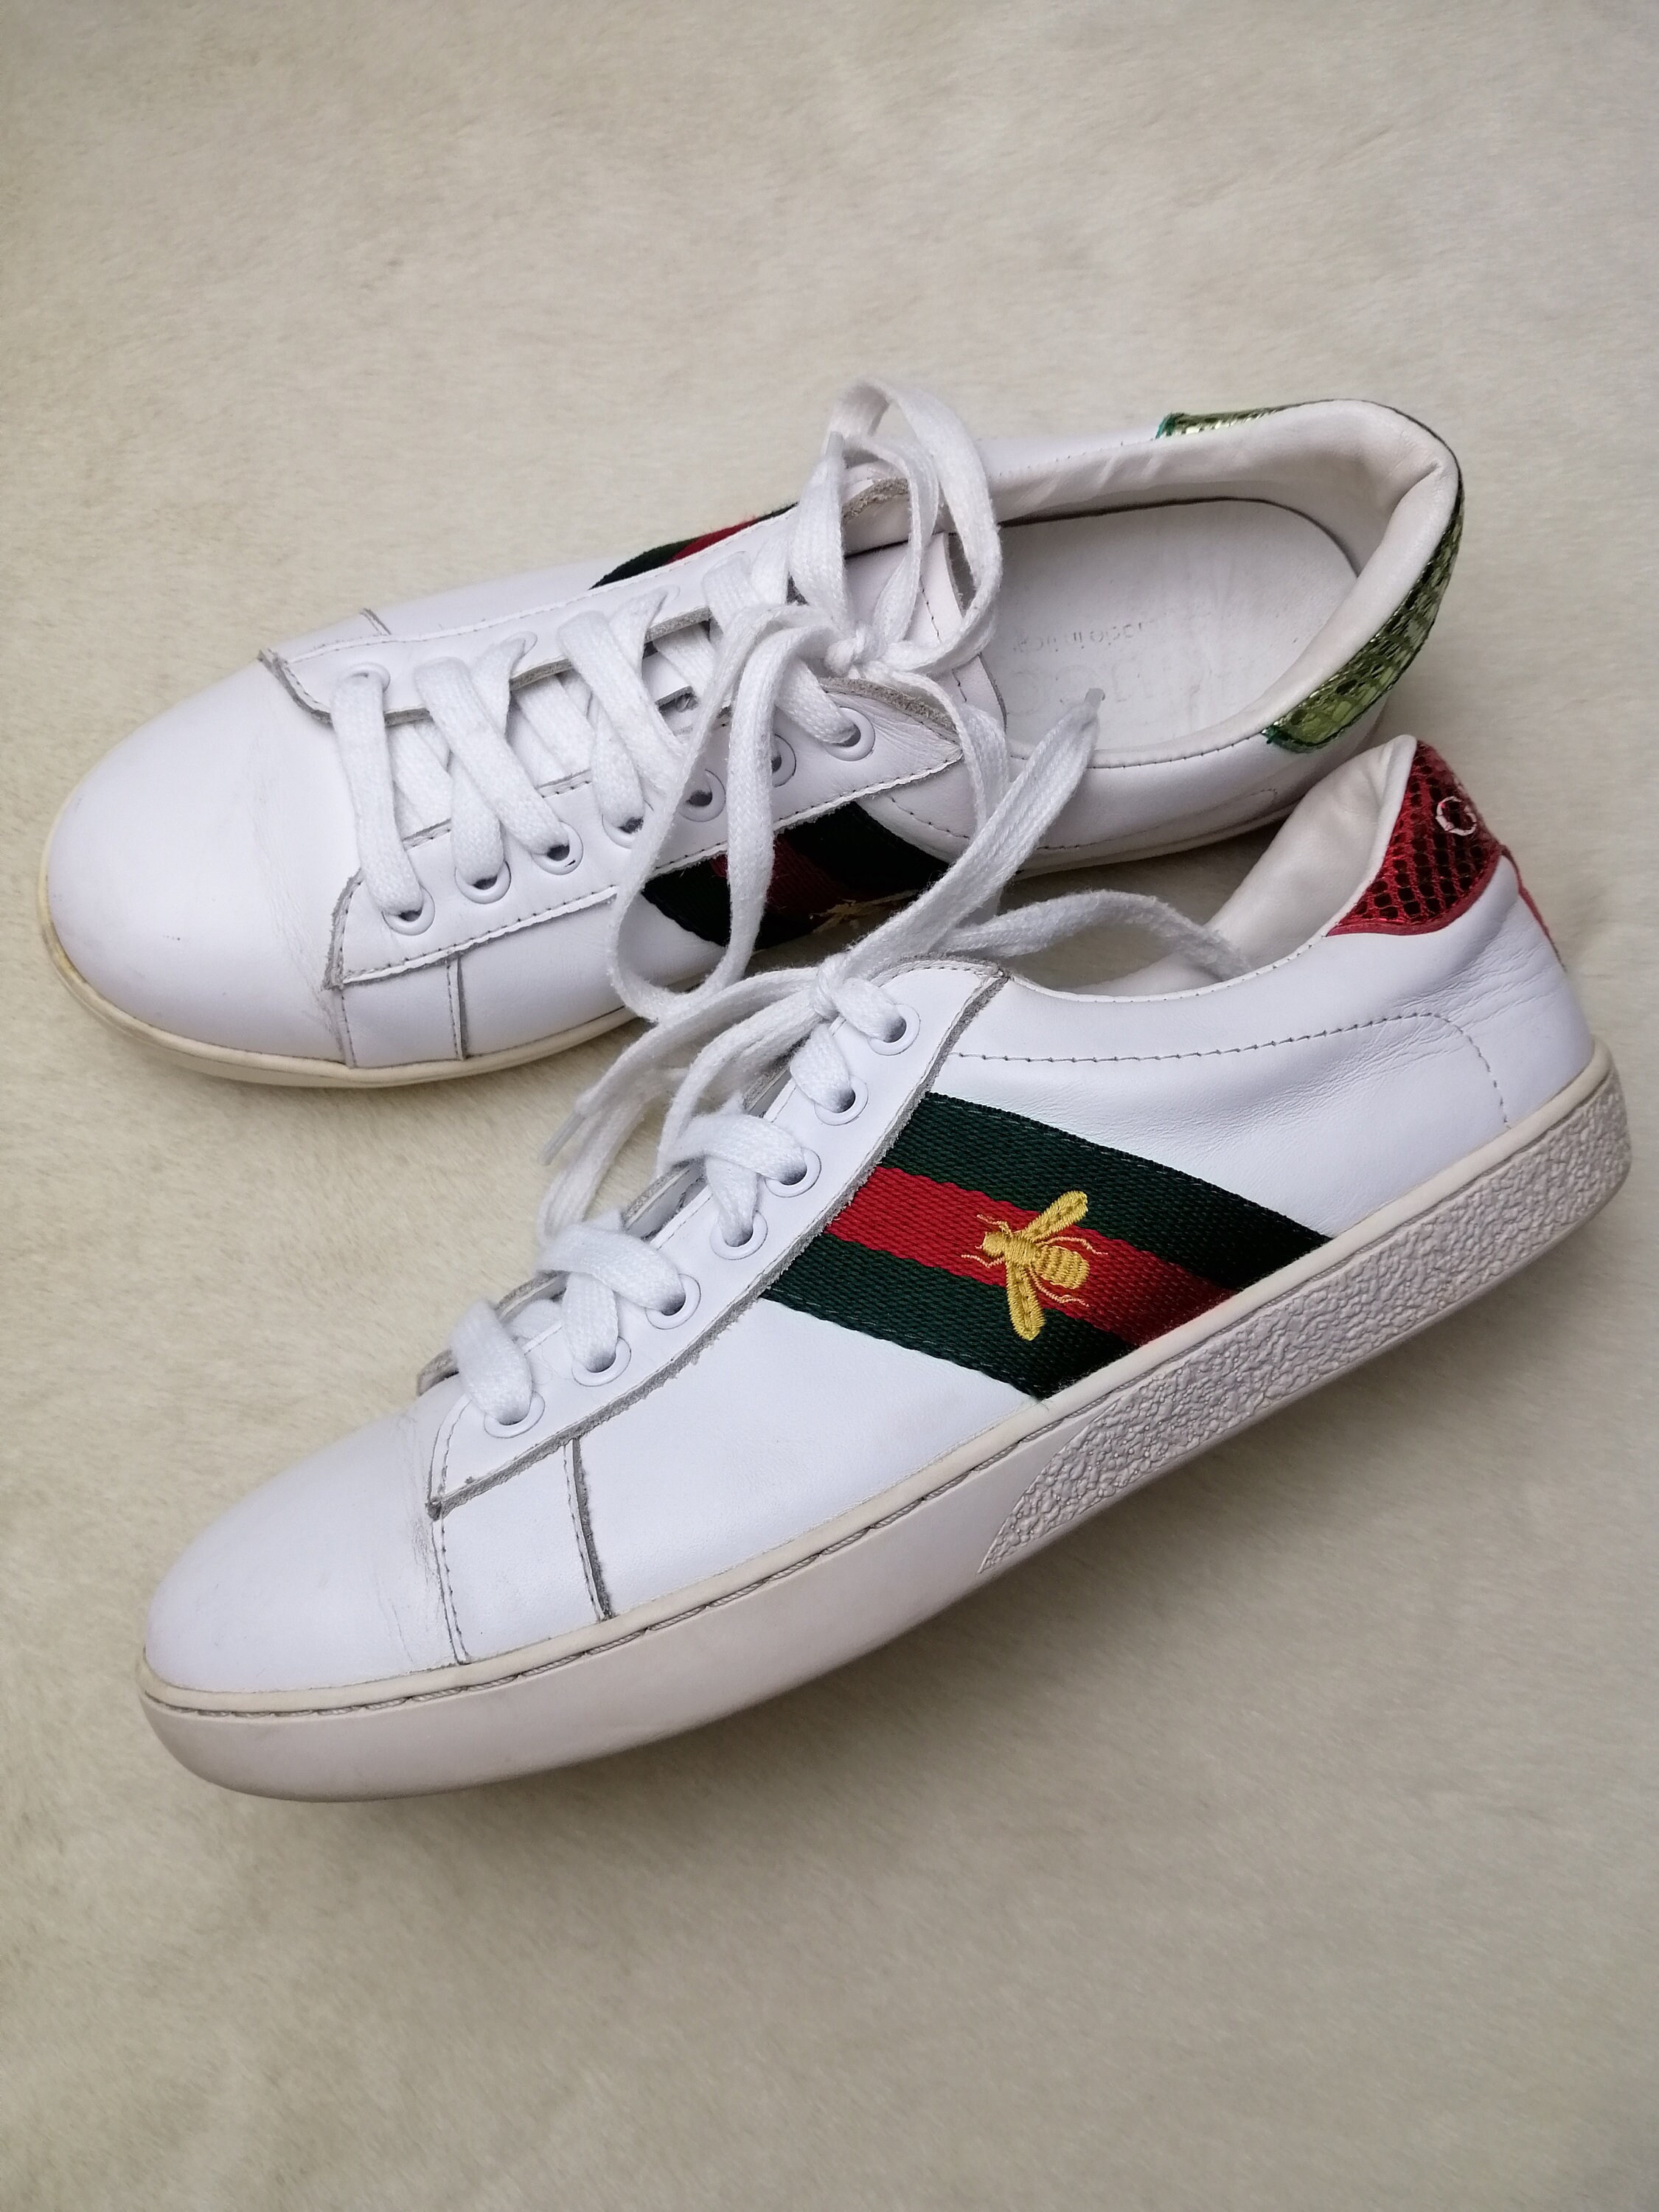 reagere temperament Mundskyl GUCCI Ace Sneakers Vintage Unisex White Leather Shoes Italian - Etsy